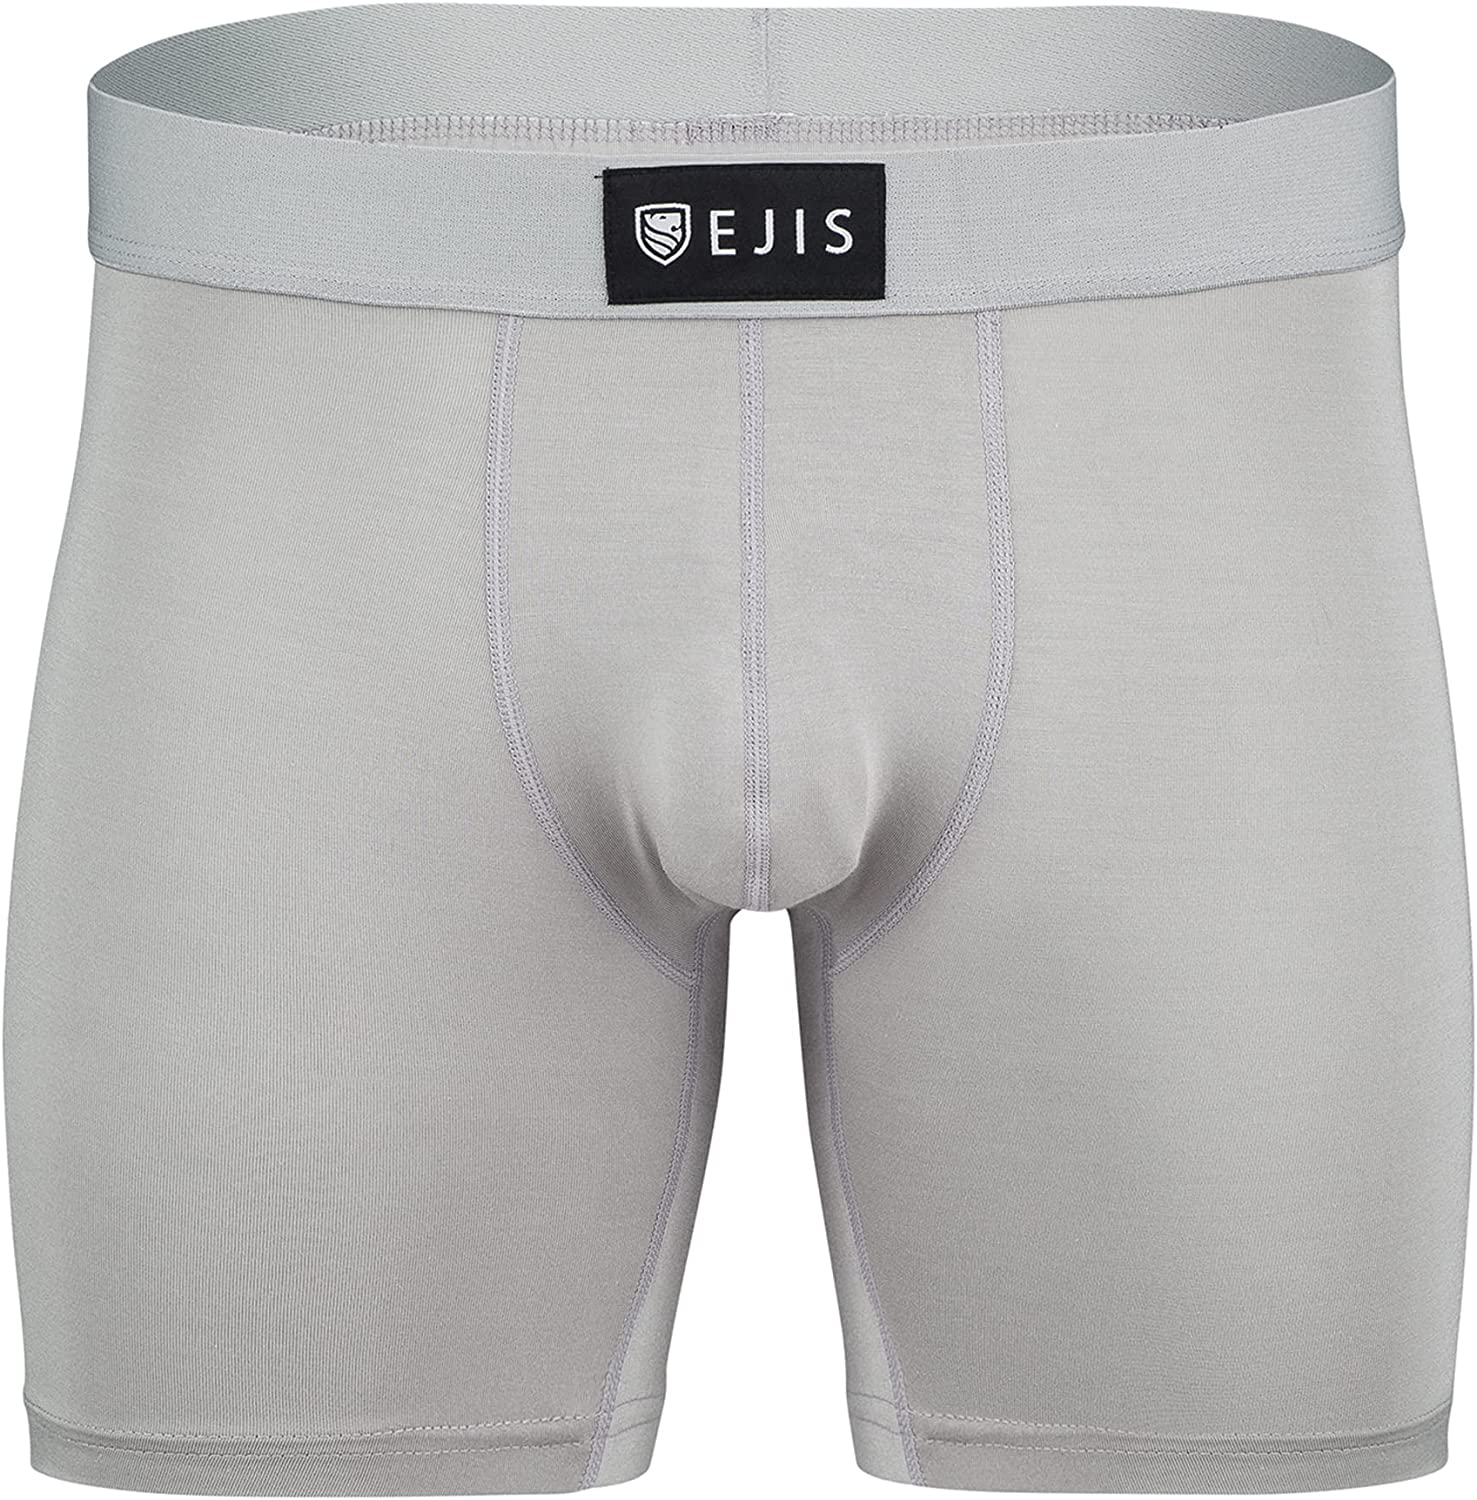 Stay confident and sweat-free with Ejis sweat-proof boxer briefs